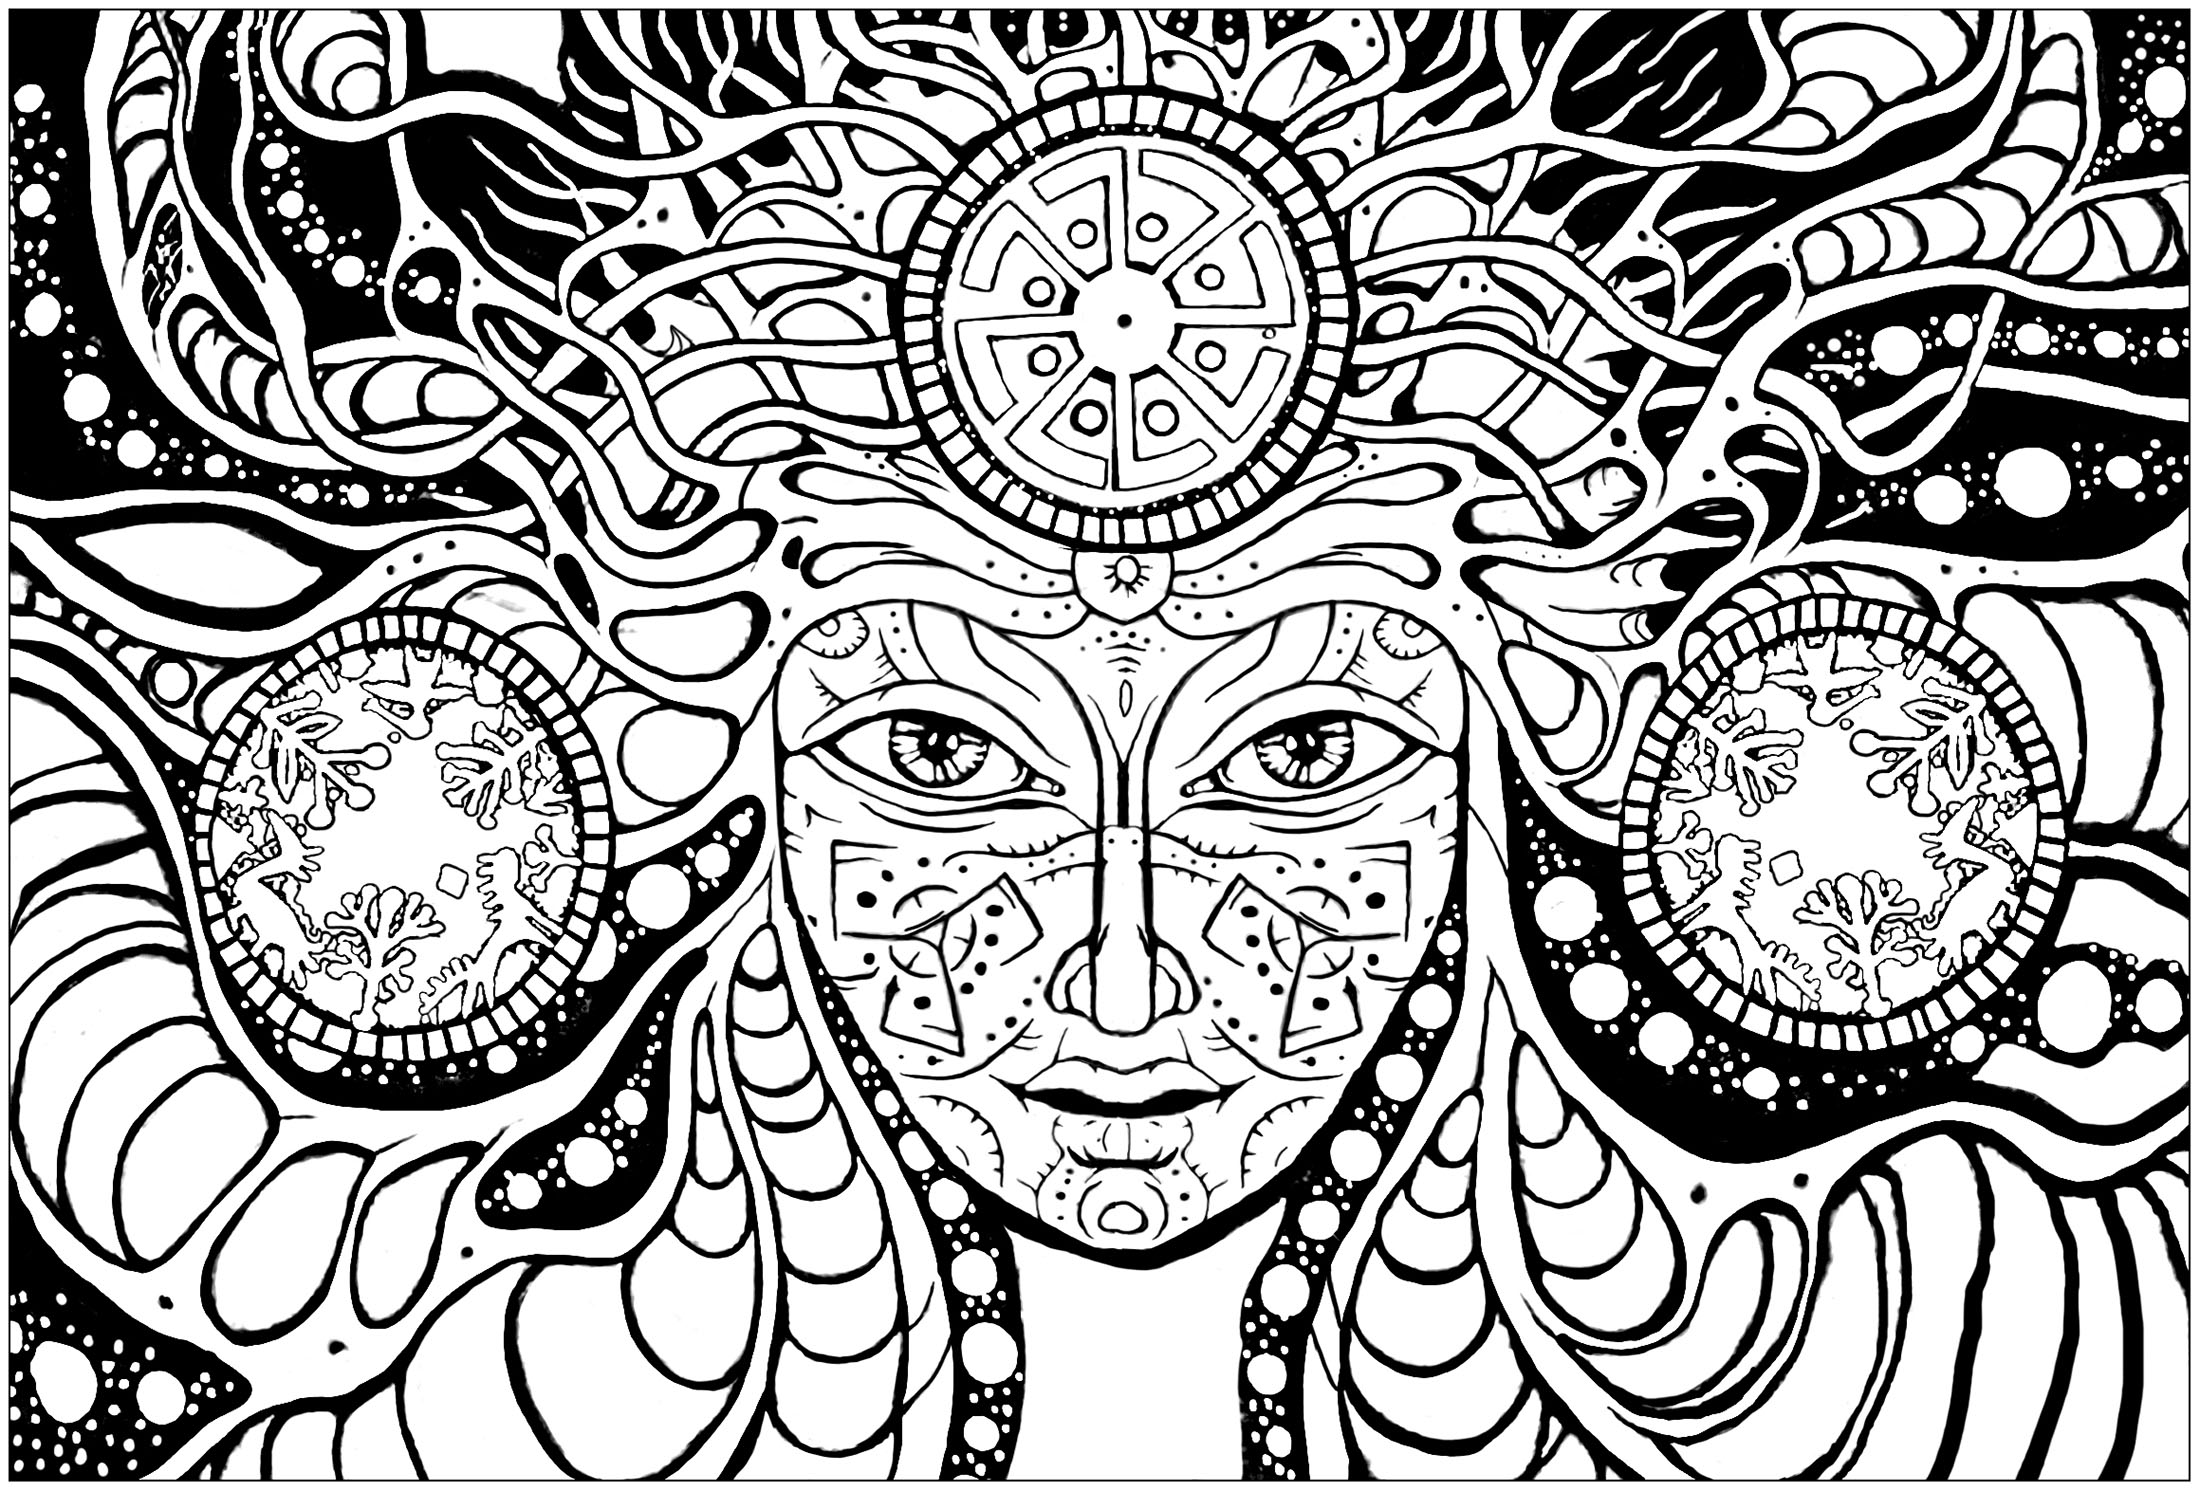 Psychedelic woman: color her bewitching face and the strange patterns surrounding her